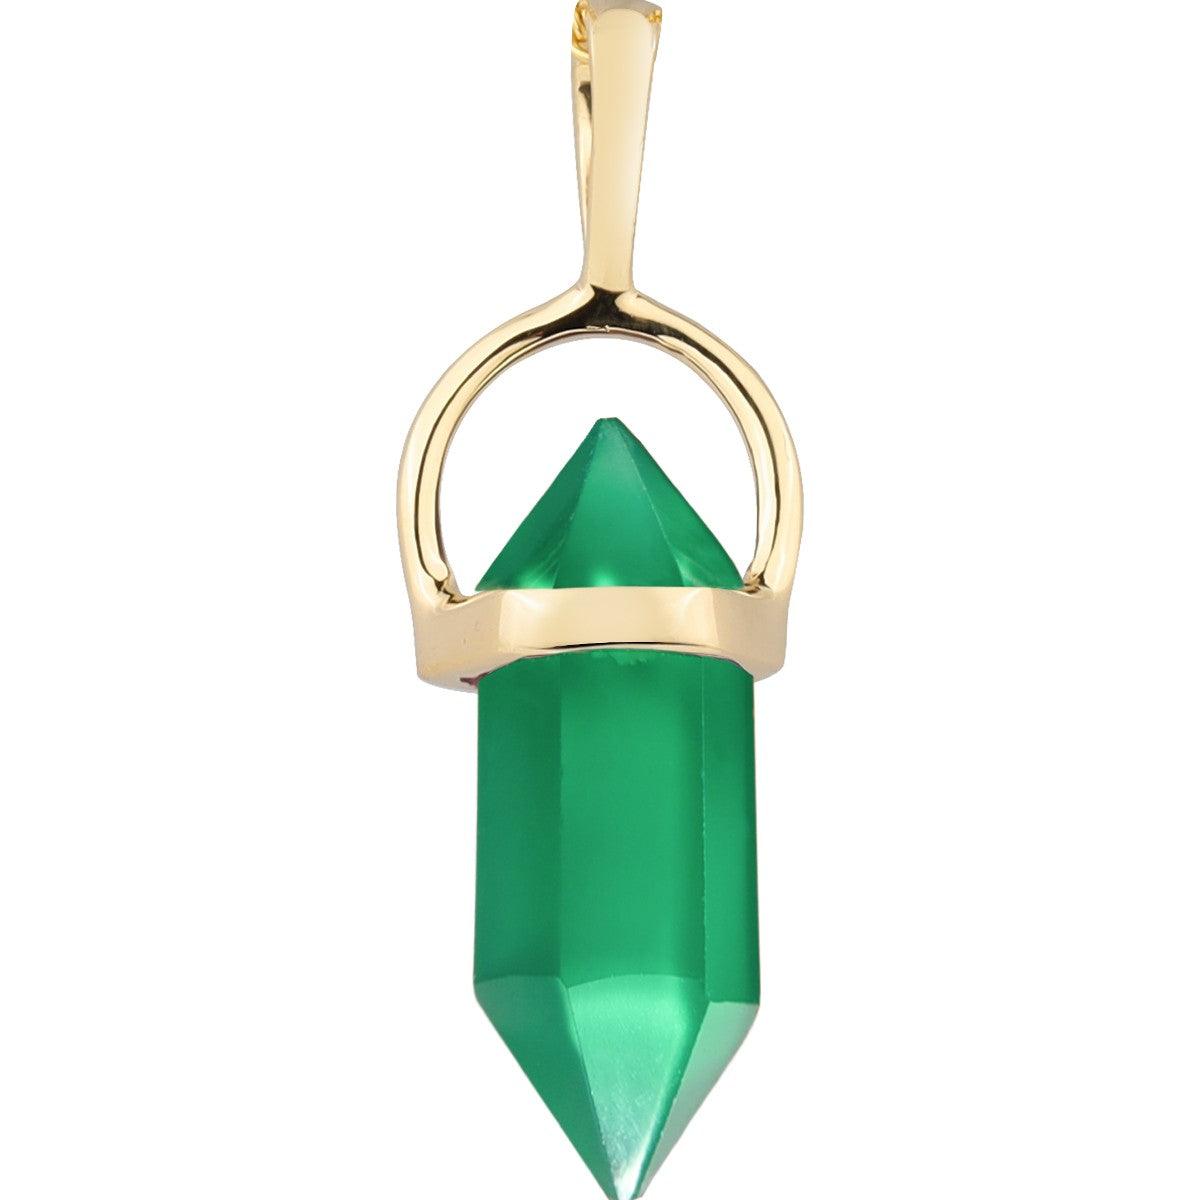 Green Onyx Pencil Necklace 14kt Gold Over Silver Chain Pendant Necklace - YoTreasure